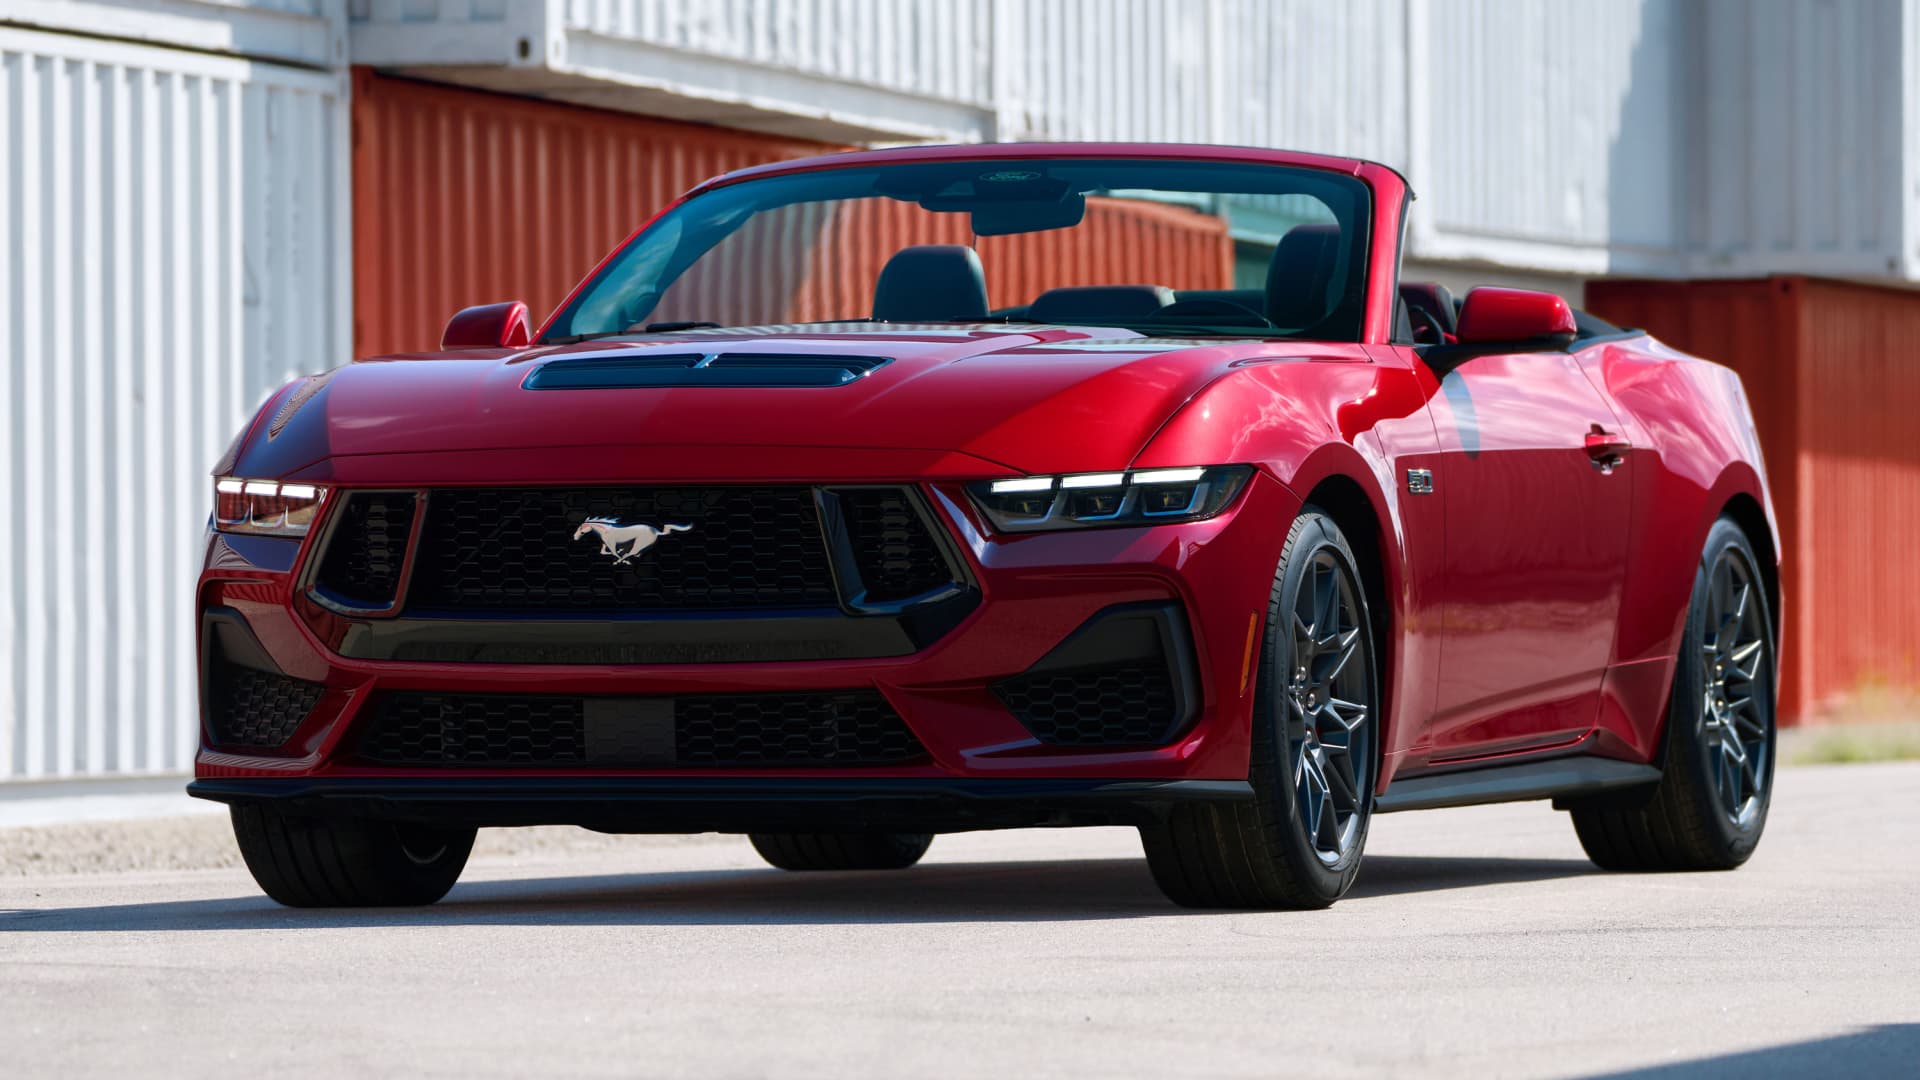 Ford unveils new gas-powered Mustang, while muscle car rivals go electric Auto Recent